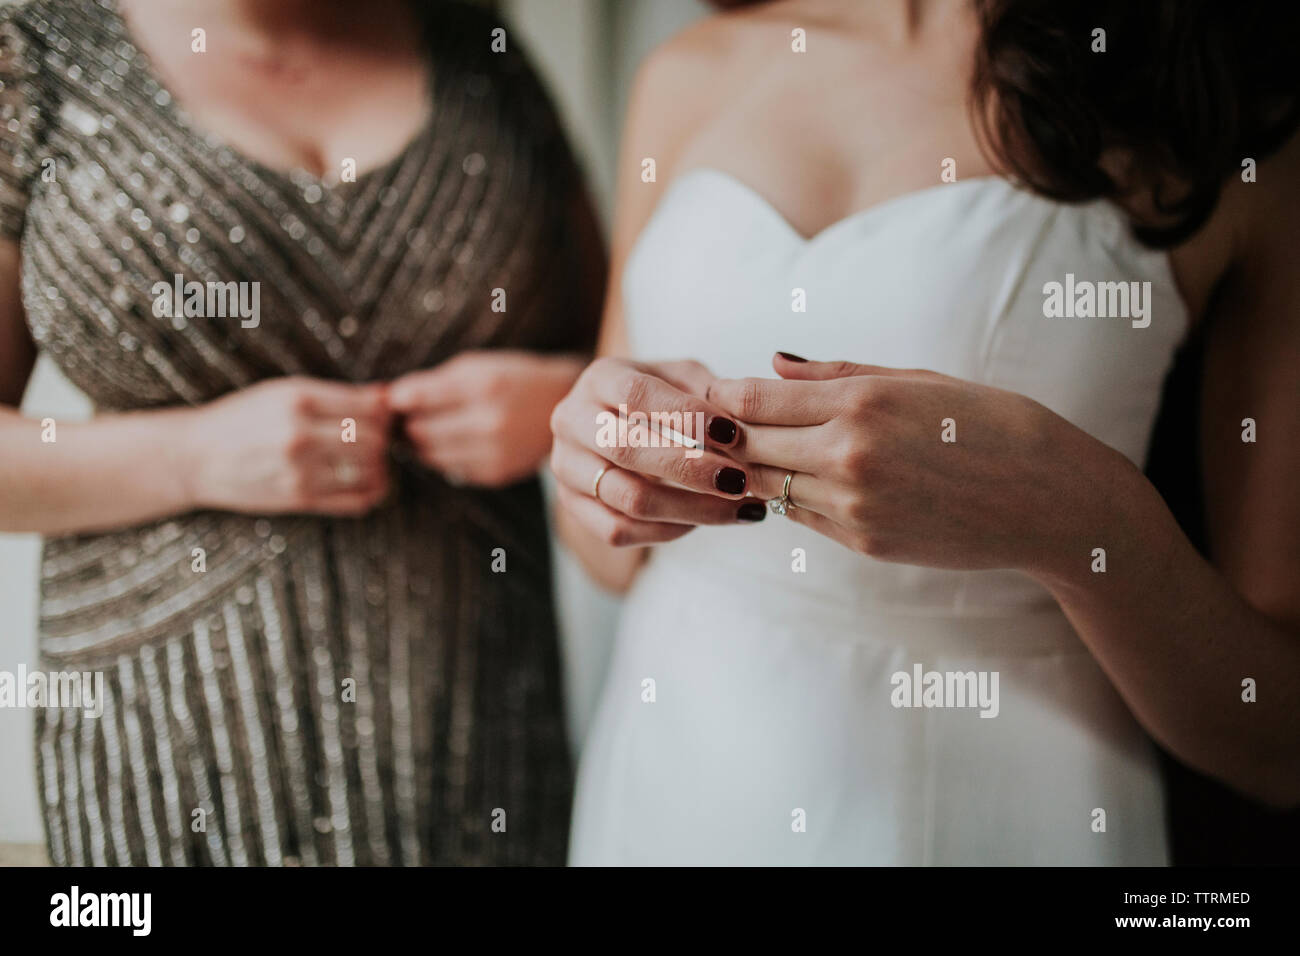 Midsection of bride wearing wedding dress while standing by bridesmaid Stock Photo